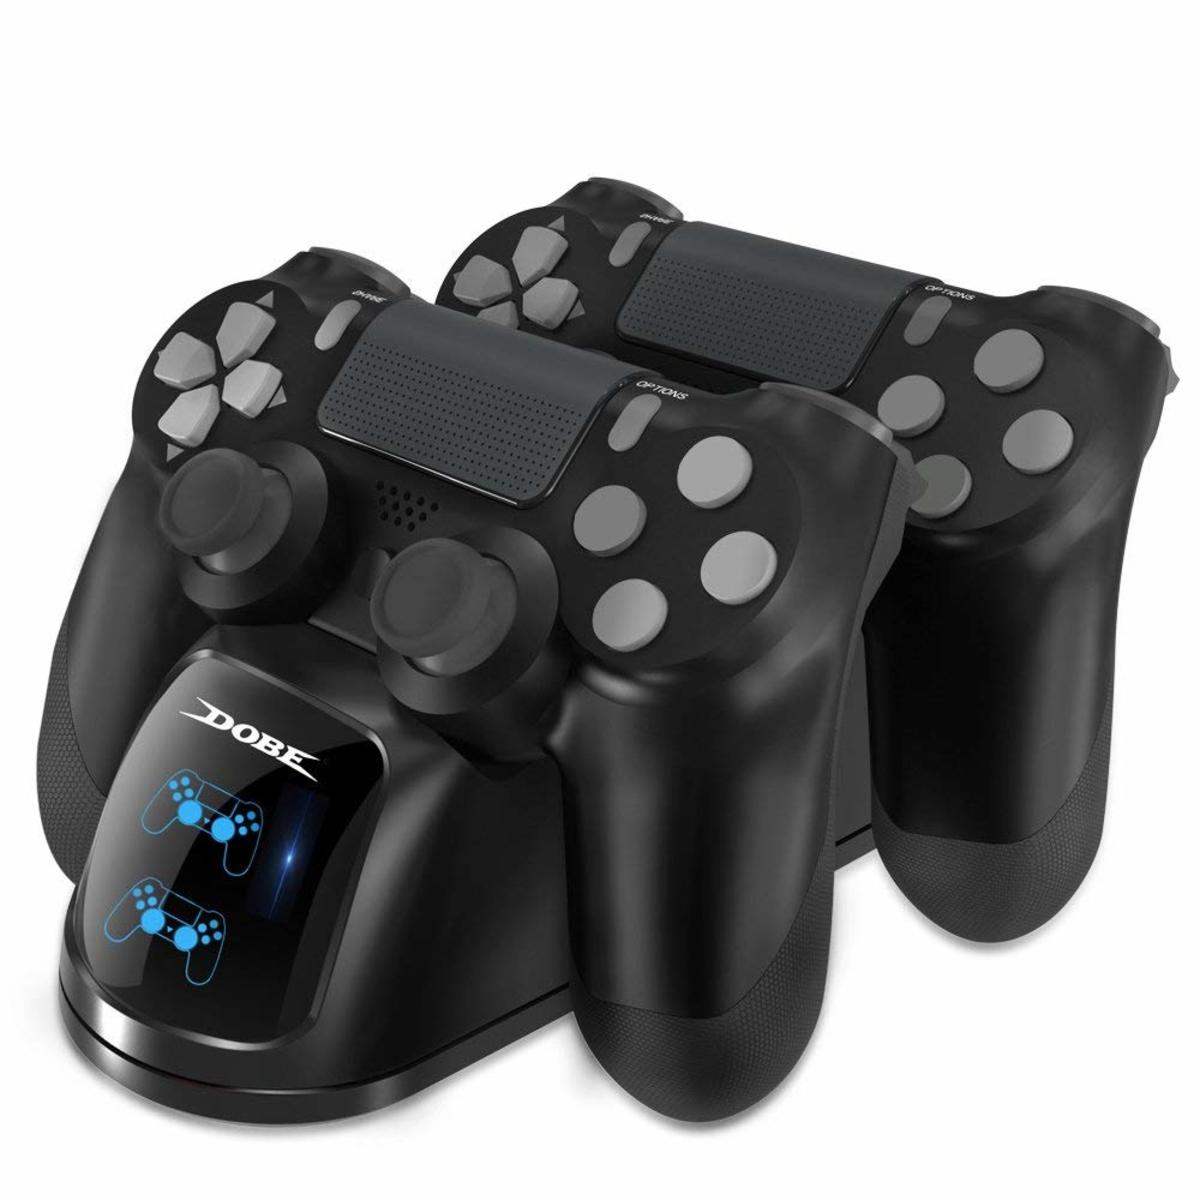 Sony PlayStation DualShock 4 Wireless Controller + Charging Docking Station